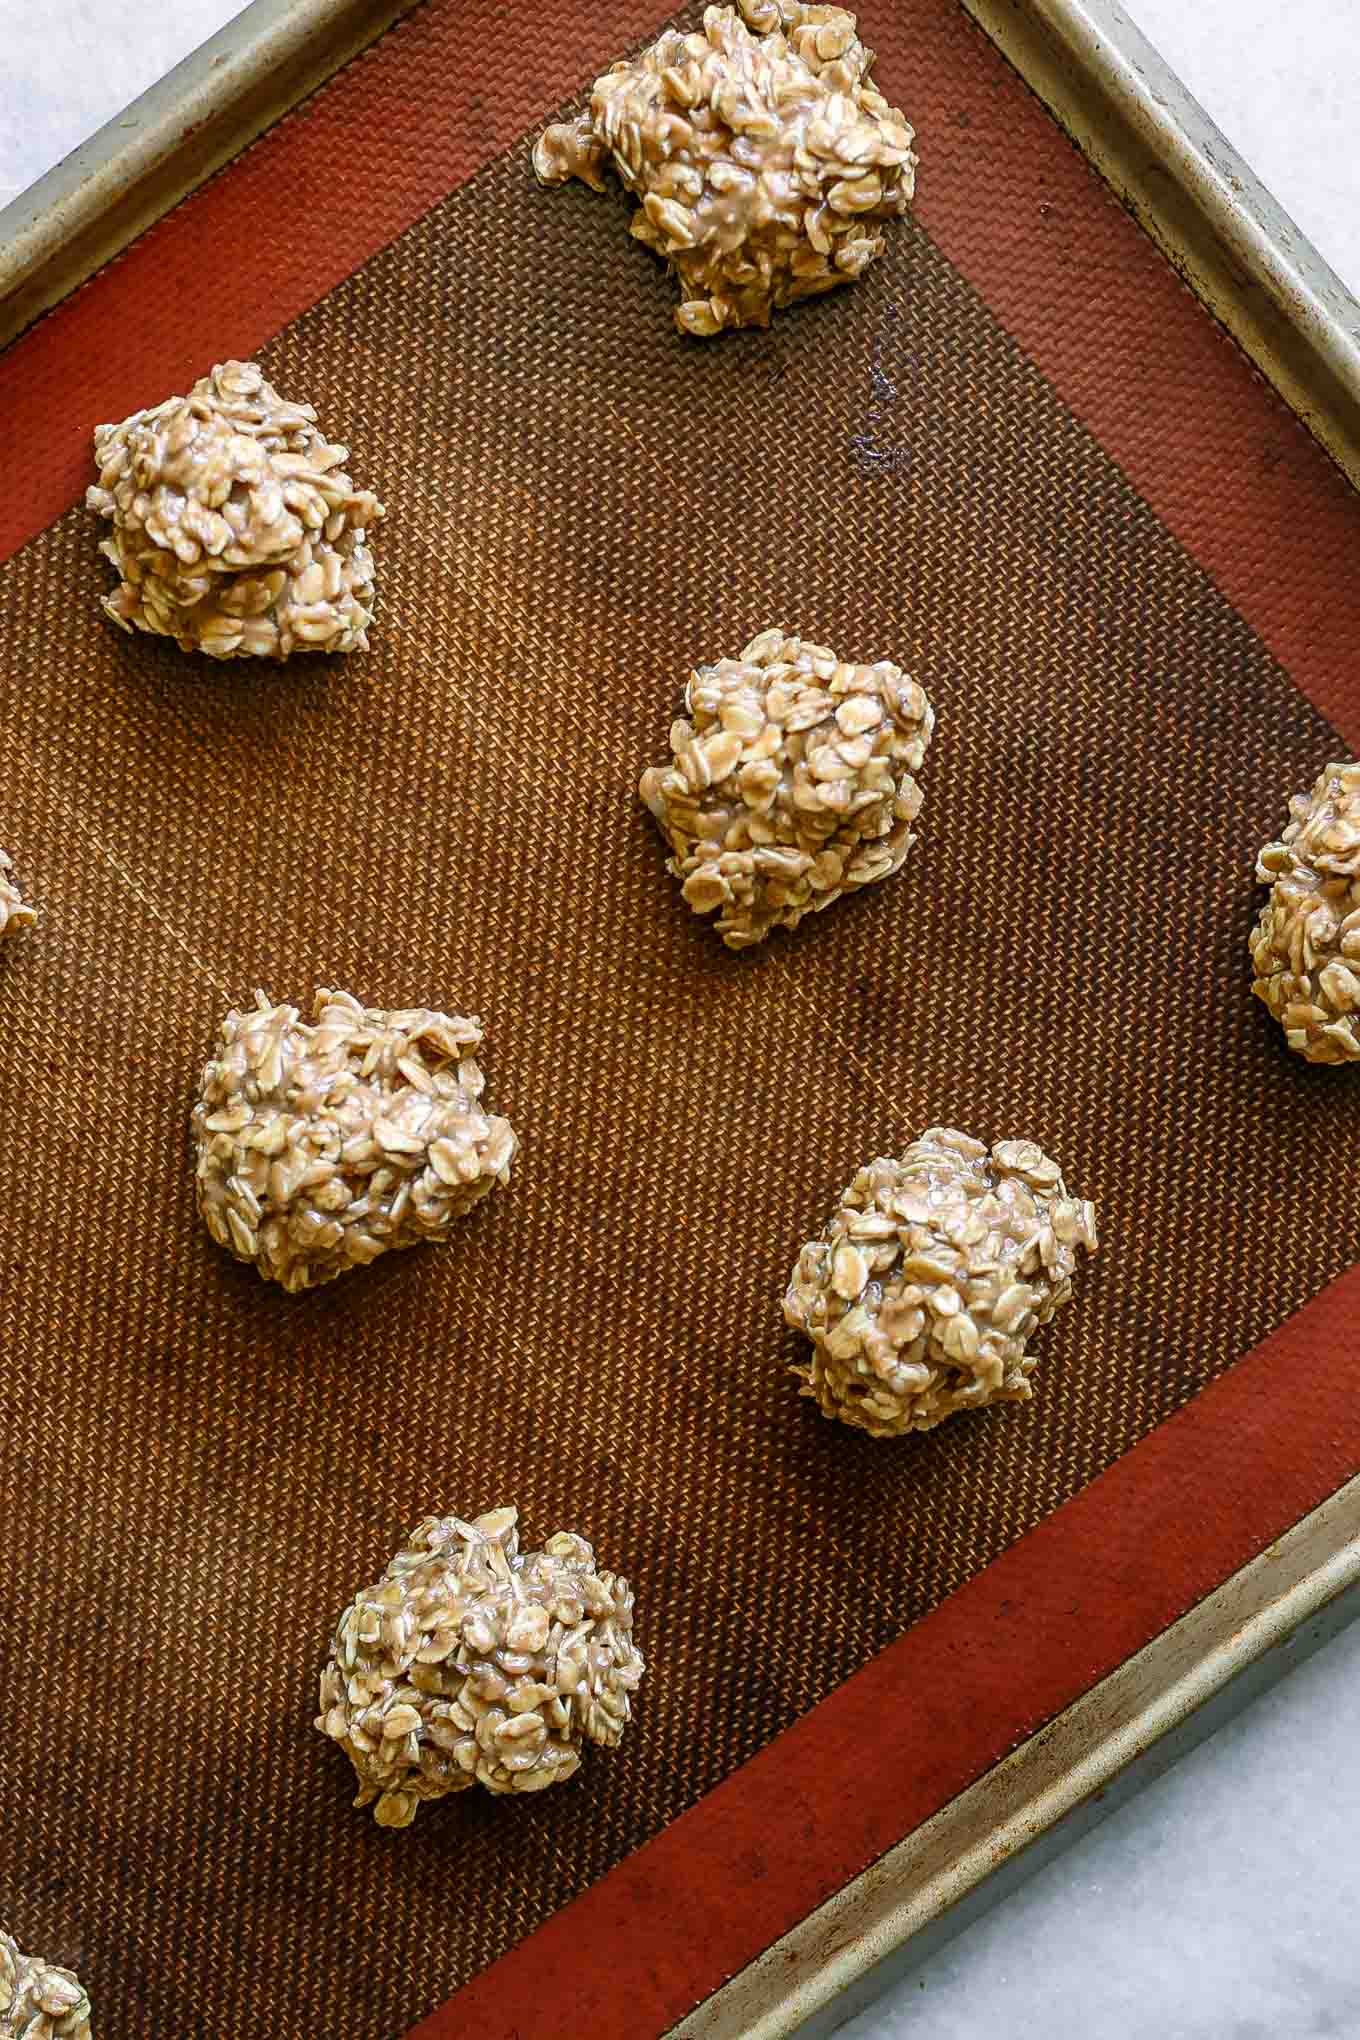 a baking sheet with oatmeal cookie batter with bananas before baking